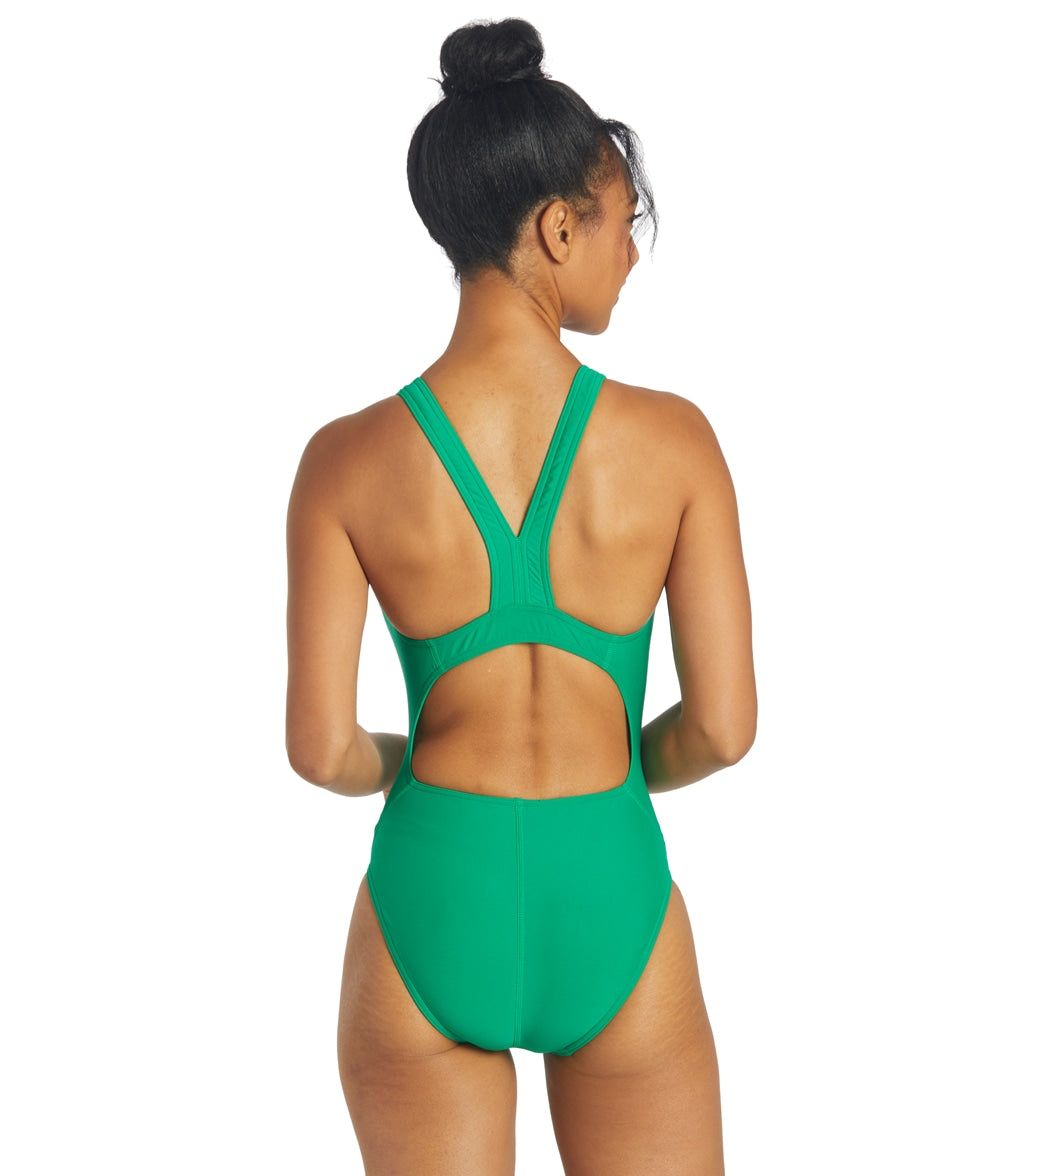 Sporti Solid Wide Strap One Piece Swimsuit